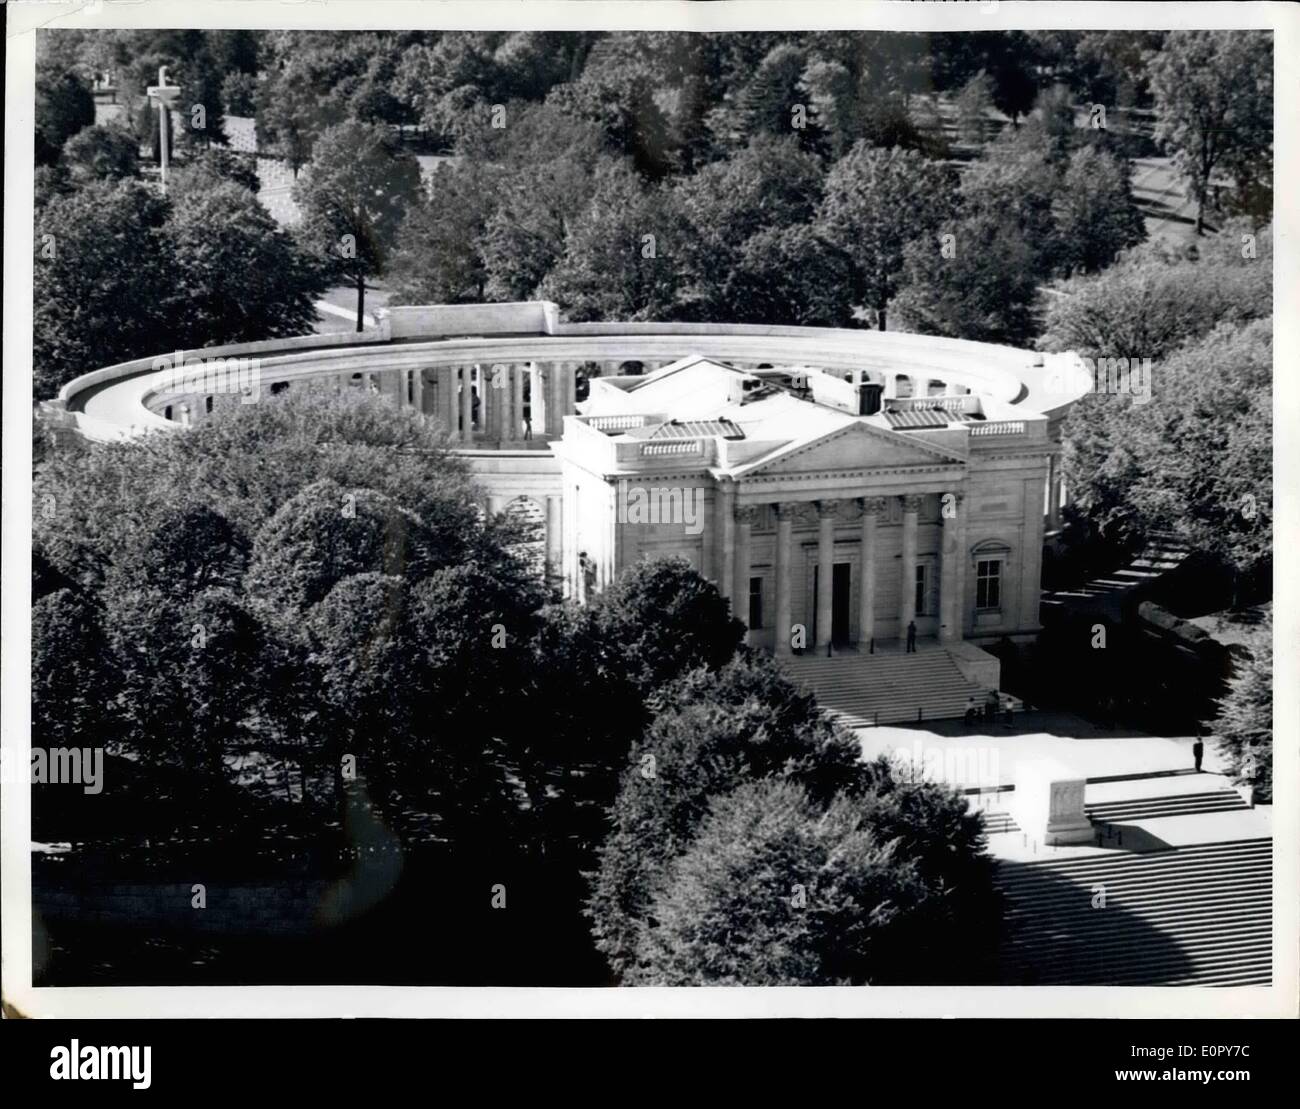 May 05, 1957 - America Honors Its War Dead: Aerial View Of Arlington National Cemetery, Virginia, Showing Tomb Of The Unknown Soldier (Lower Right). The Mast Of The Battleship Maine Is At Upper Left. Official U.S. Army Photo Released By The Dept. Of Defense Re-Released At Wash., D.C. Stock Photo